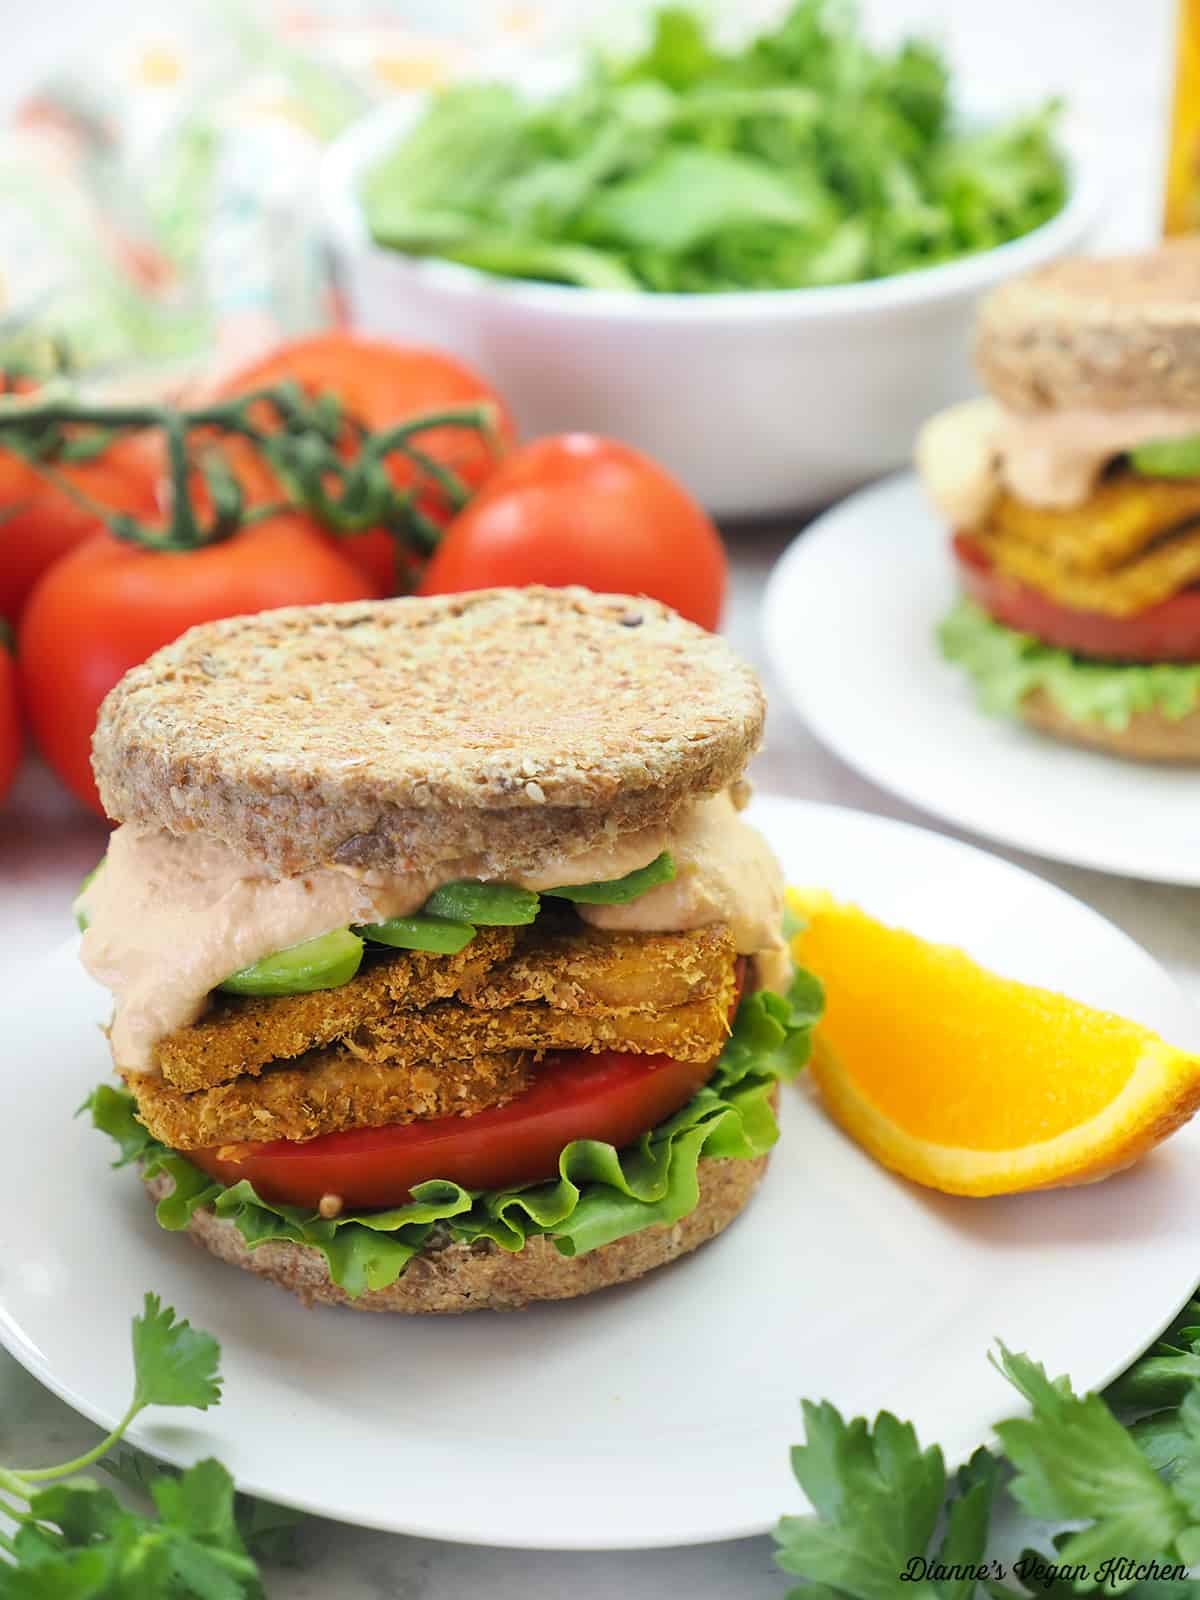 breakfast sandwich with orange, tomatoes, and lettuce